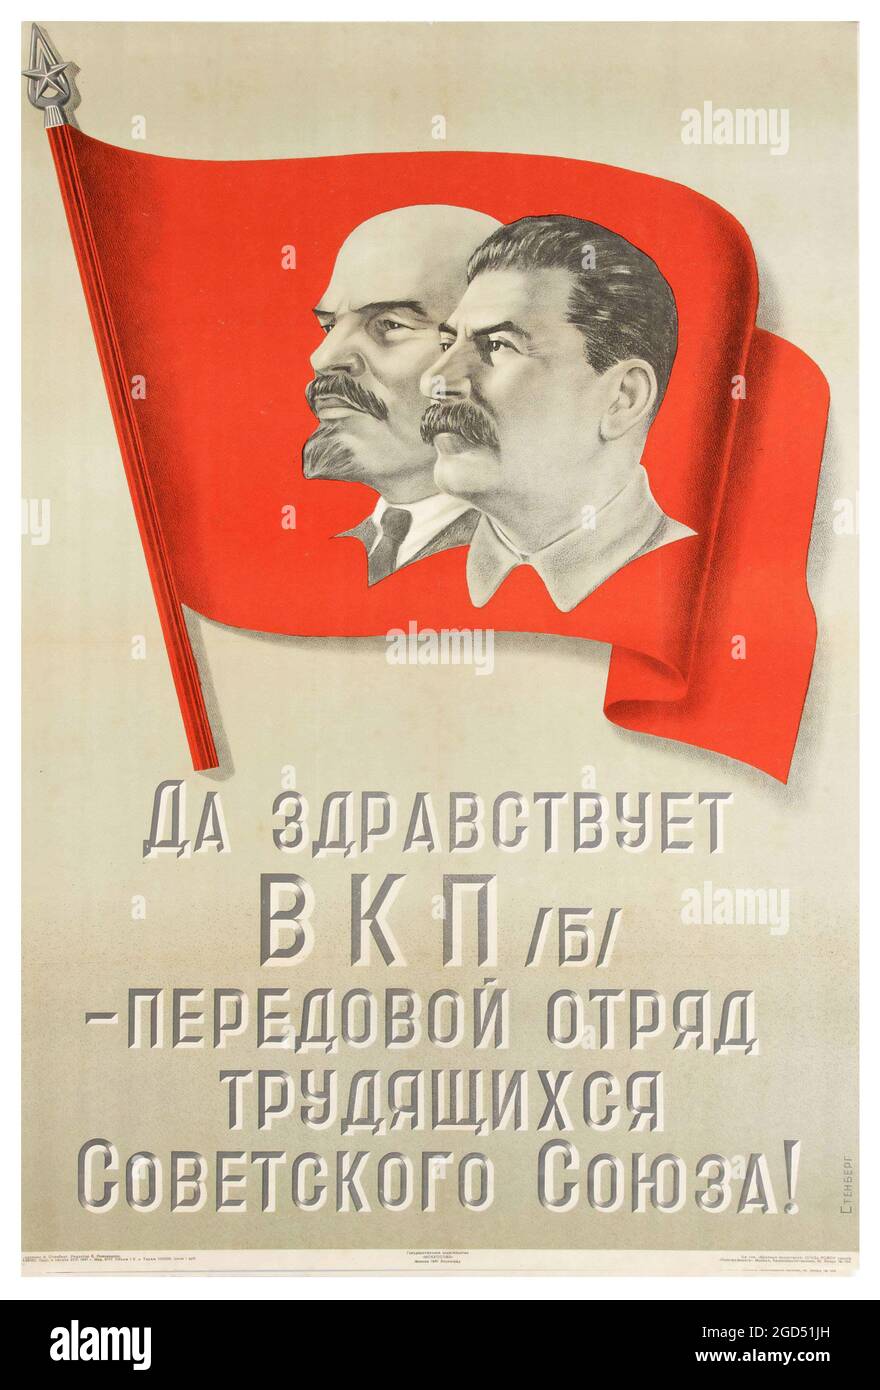 Russian propaganda poster of the 2nd World War, from 1941, with Lenin and Stalin on a red flag. Stock Photo